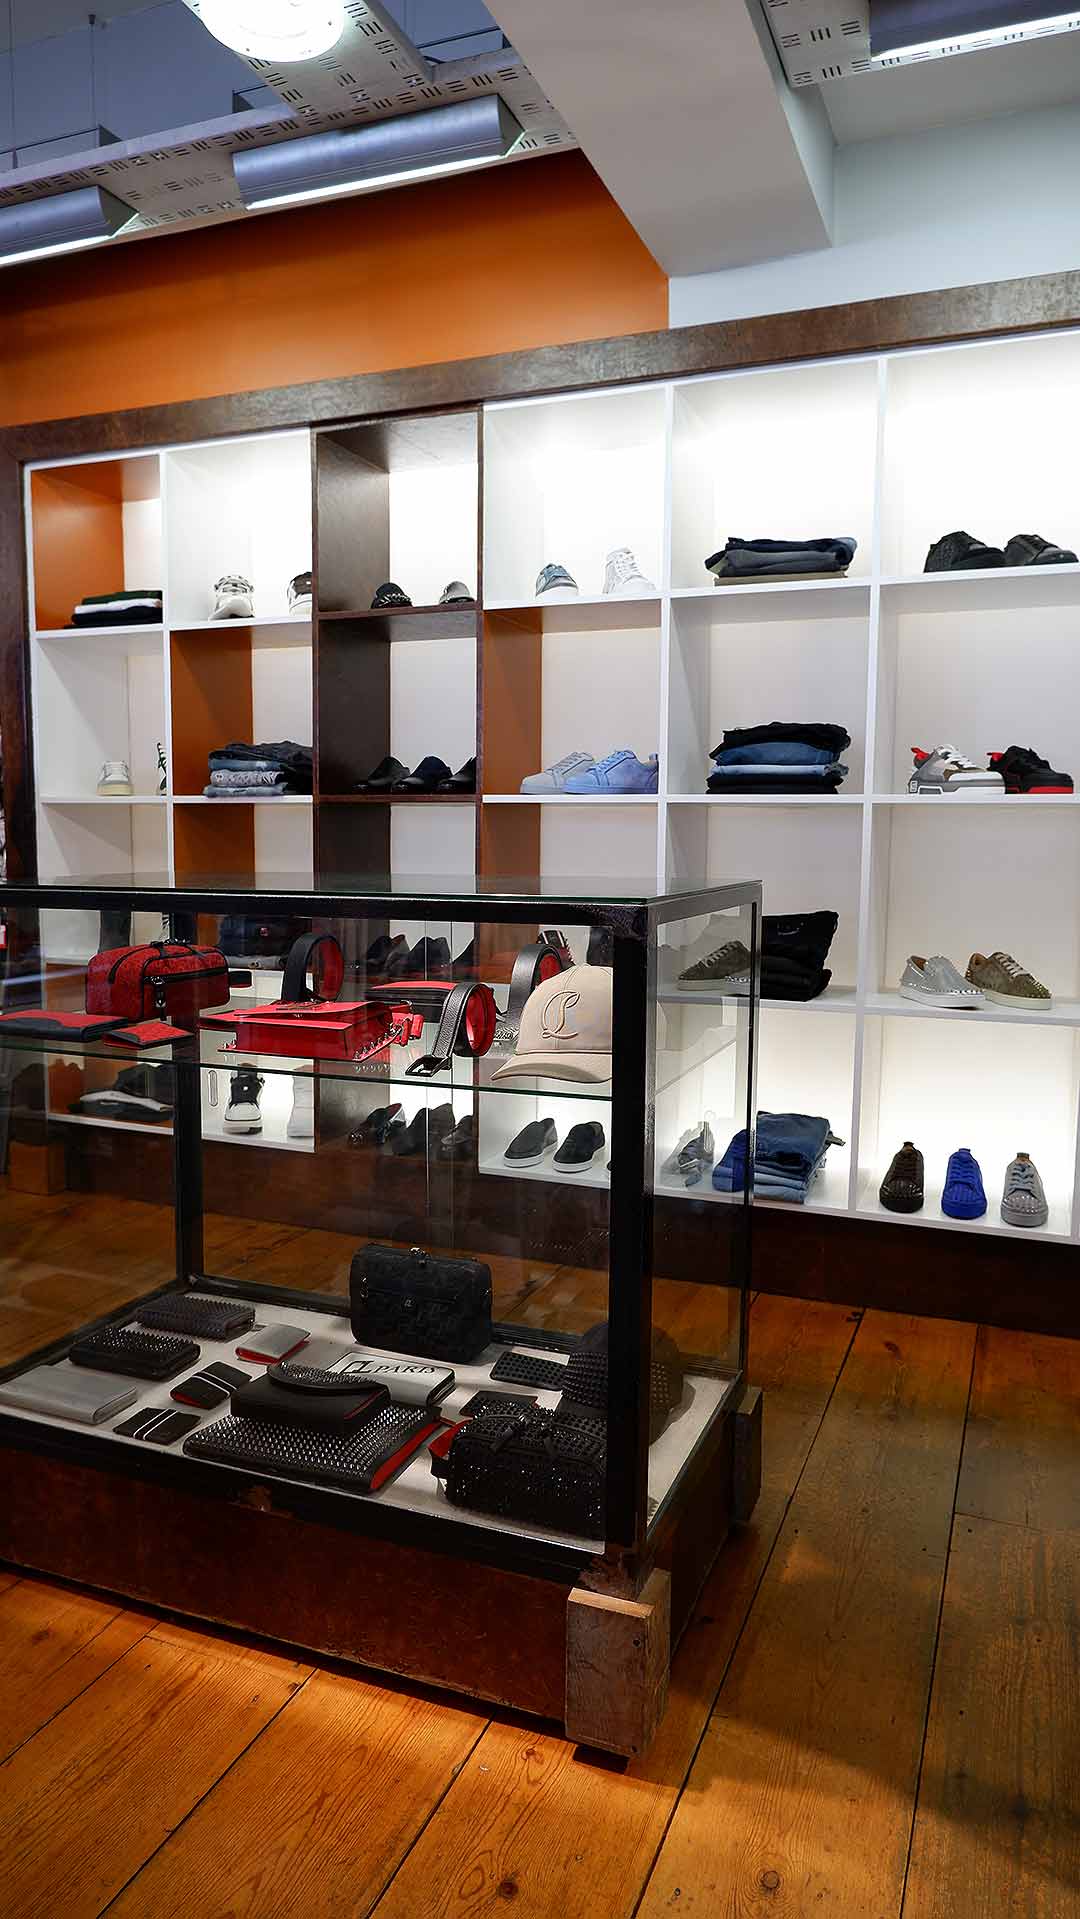 Zoo Fashions. Brick-and-mortar mens designer clothing store in Ilford Essex. Store Interior. Stockist of designer brands including Christian Louboutin. Styles such as Louis Junior, Astroloubi,  FAV shoes and wallet